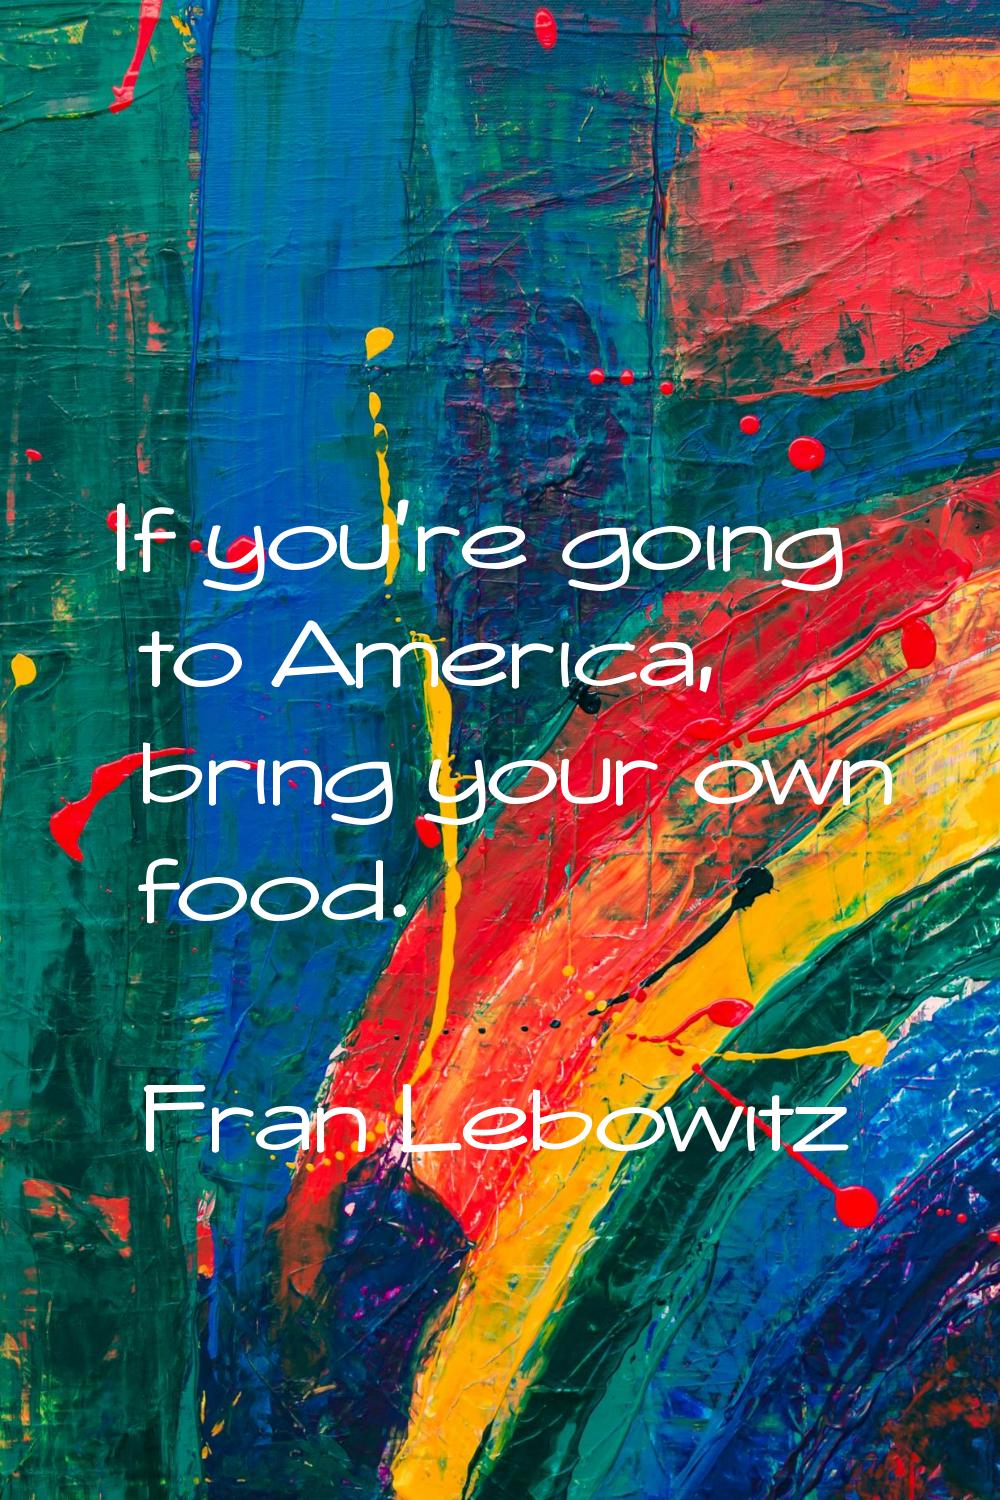 If you're going to America, bring your own food.